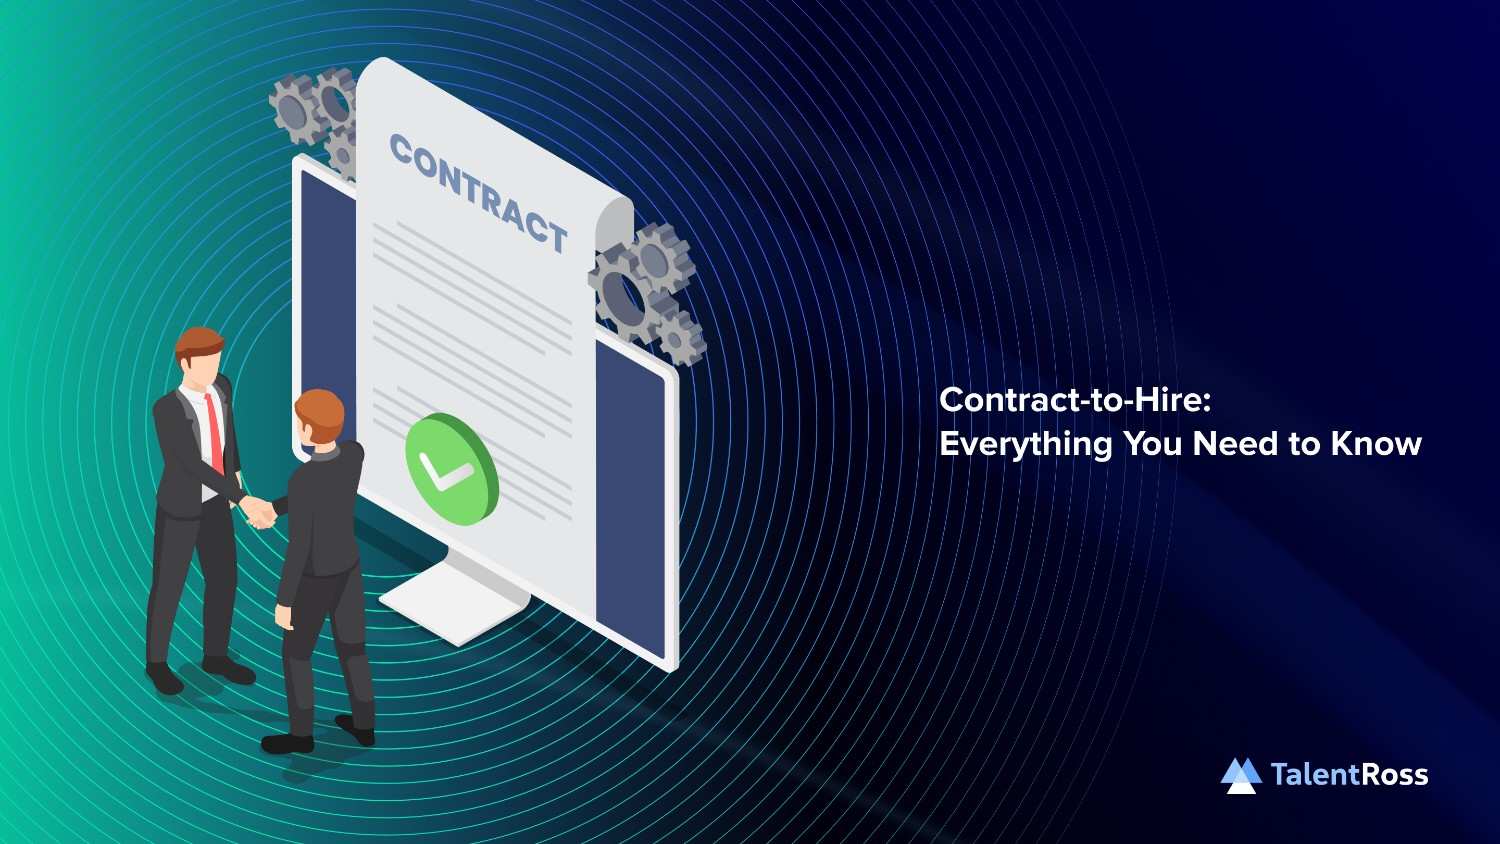 Contract-to-Hire: Everything You Need to Know 